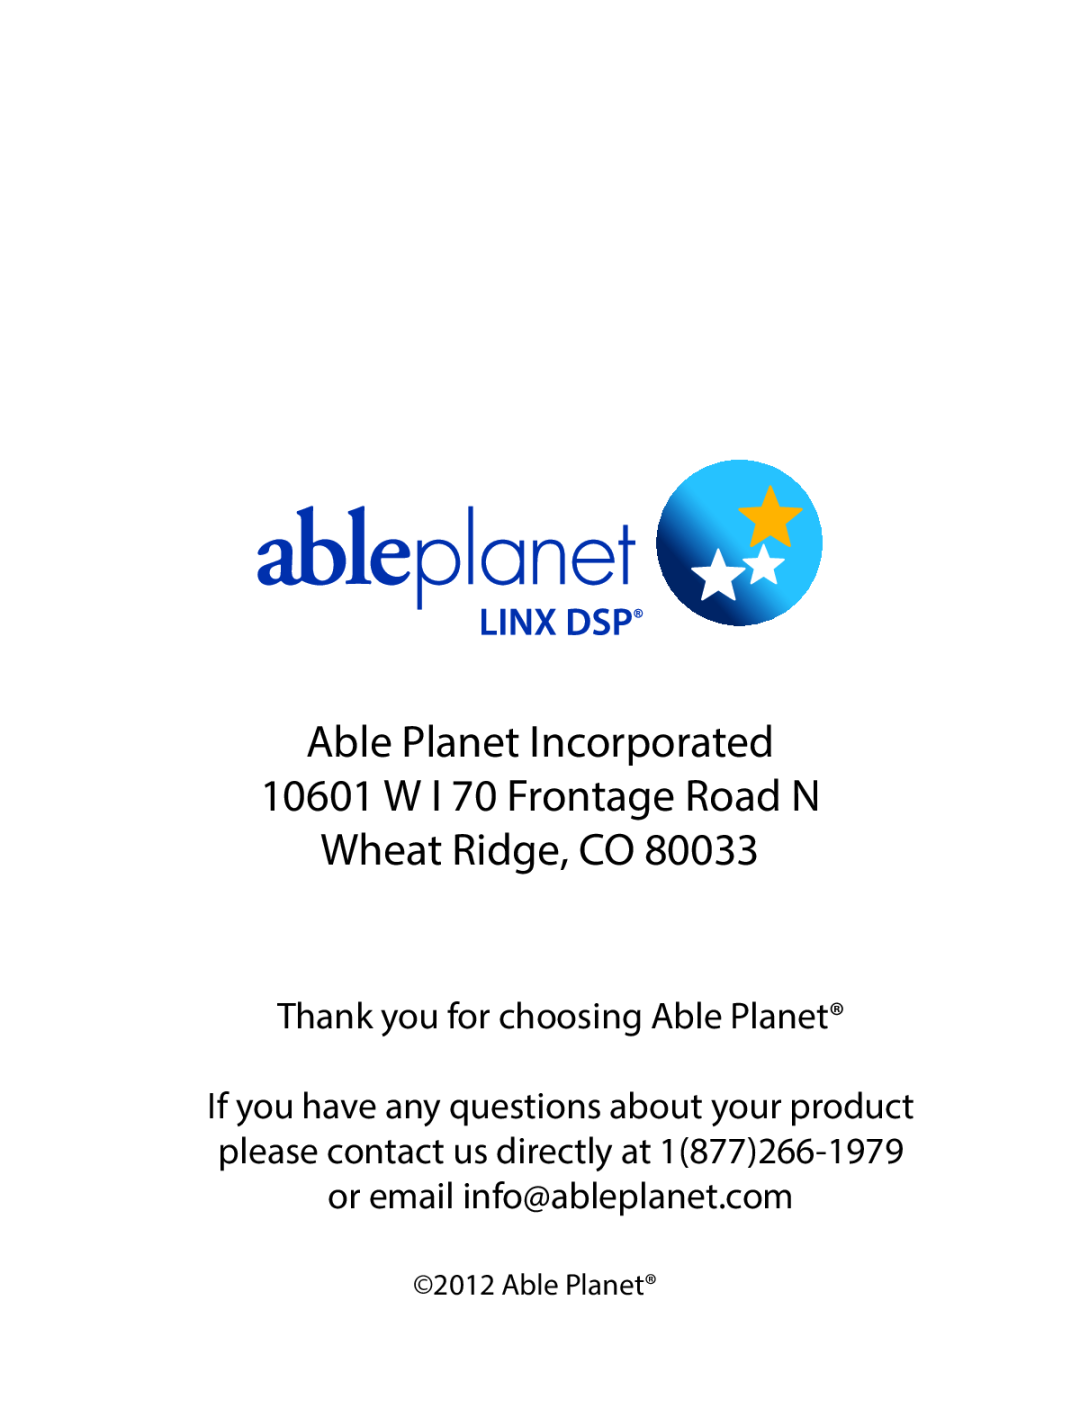 Able Planet PS1600BTE Able Planet Incorporated, W I 70 Frontage Road N Wheat Ridge, CO, Thank you for choosing Able Planet 